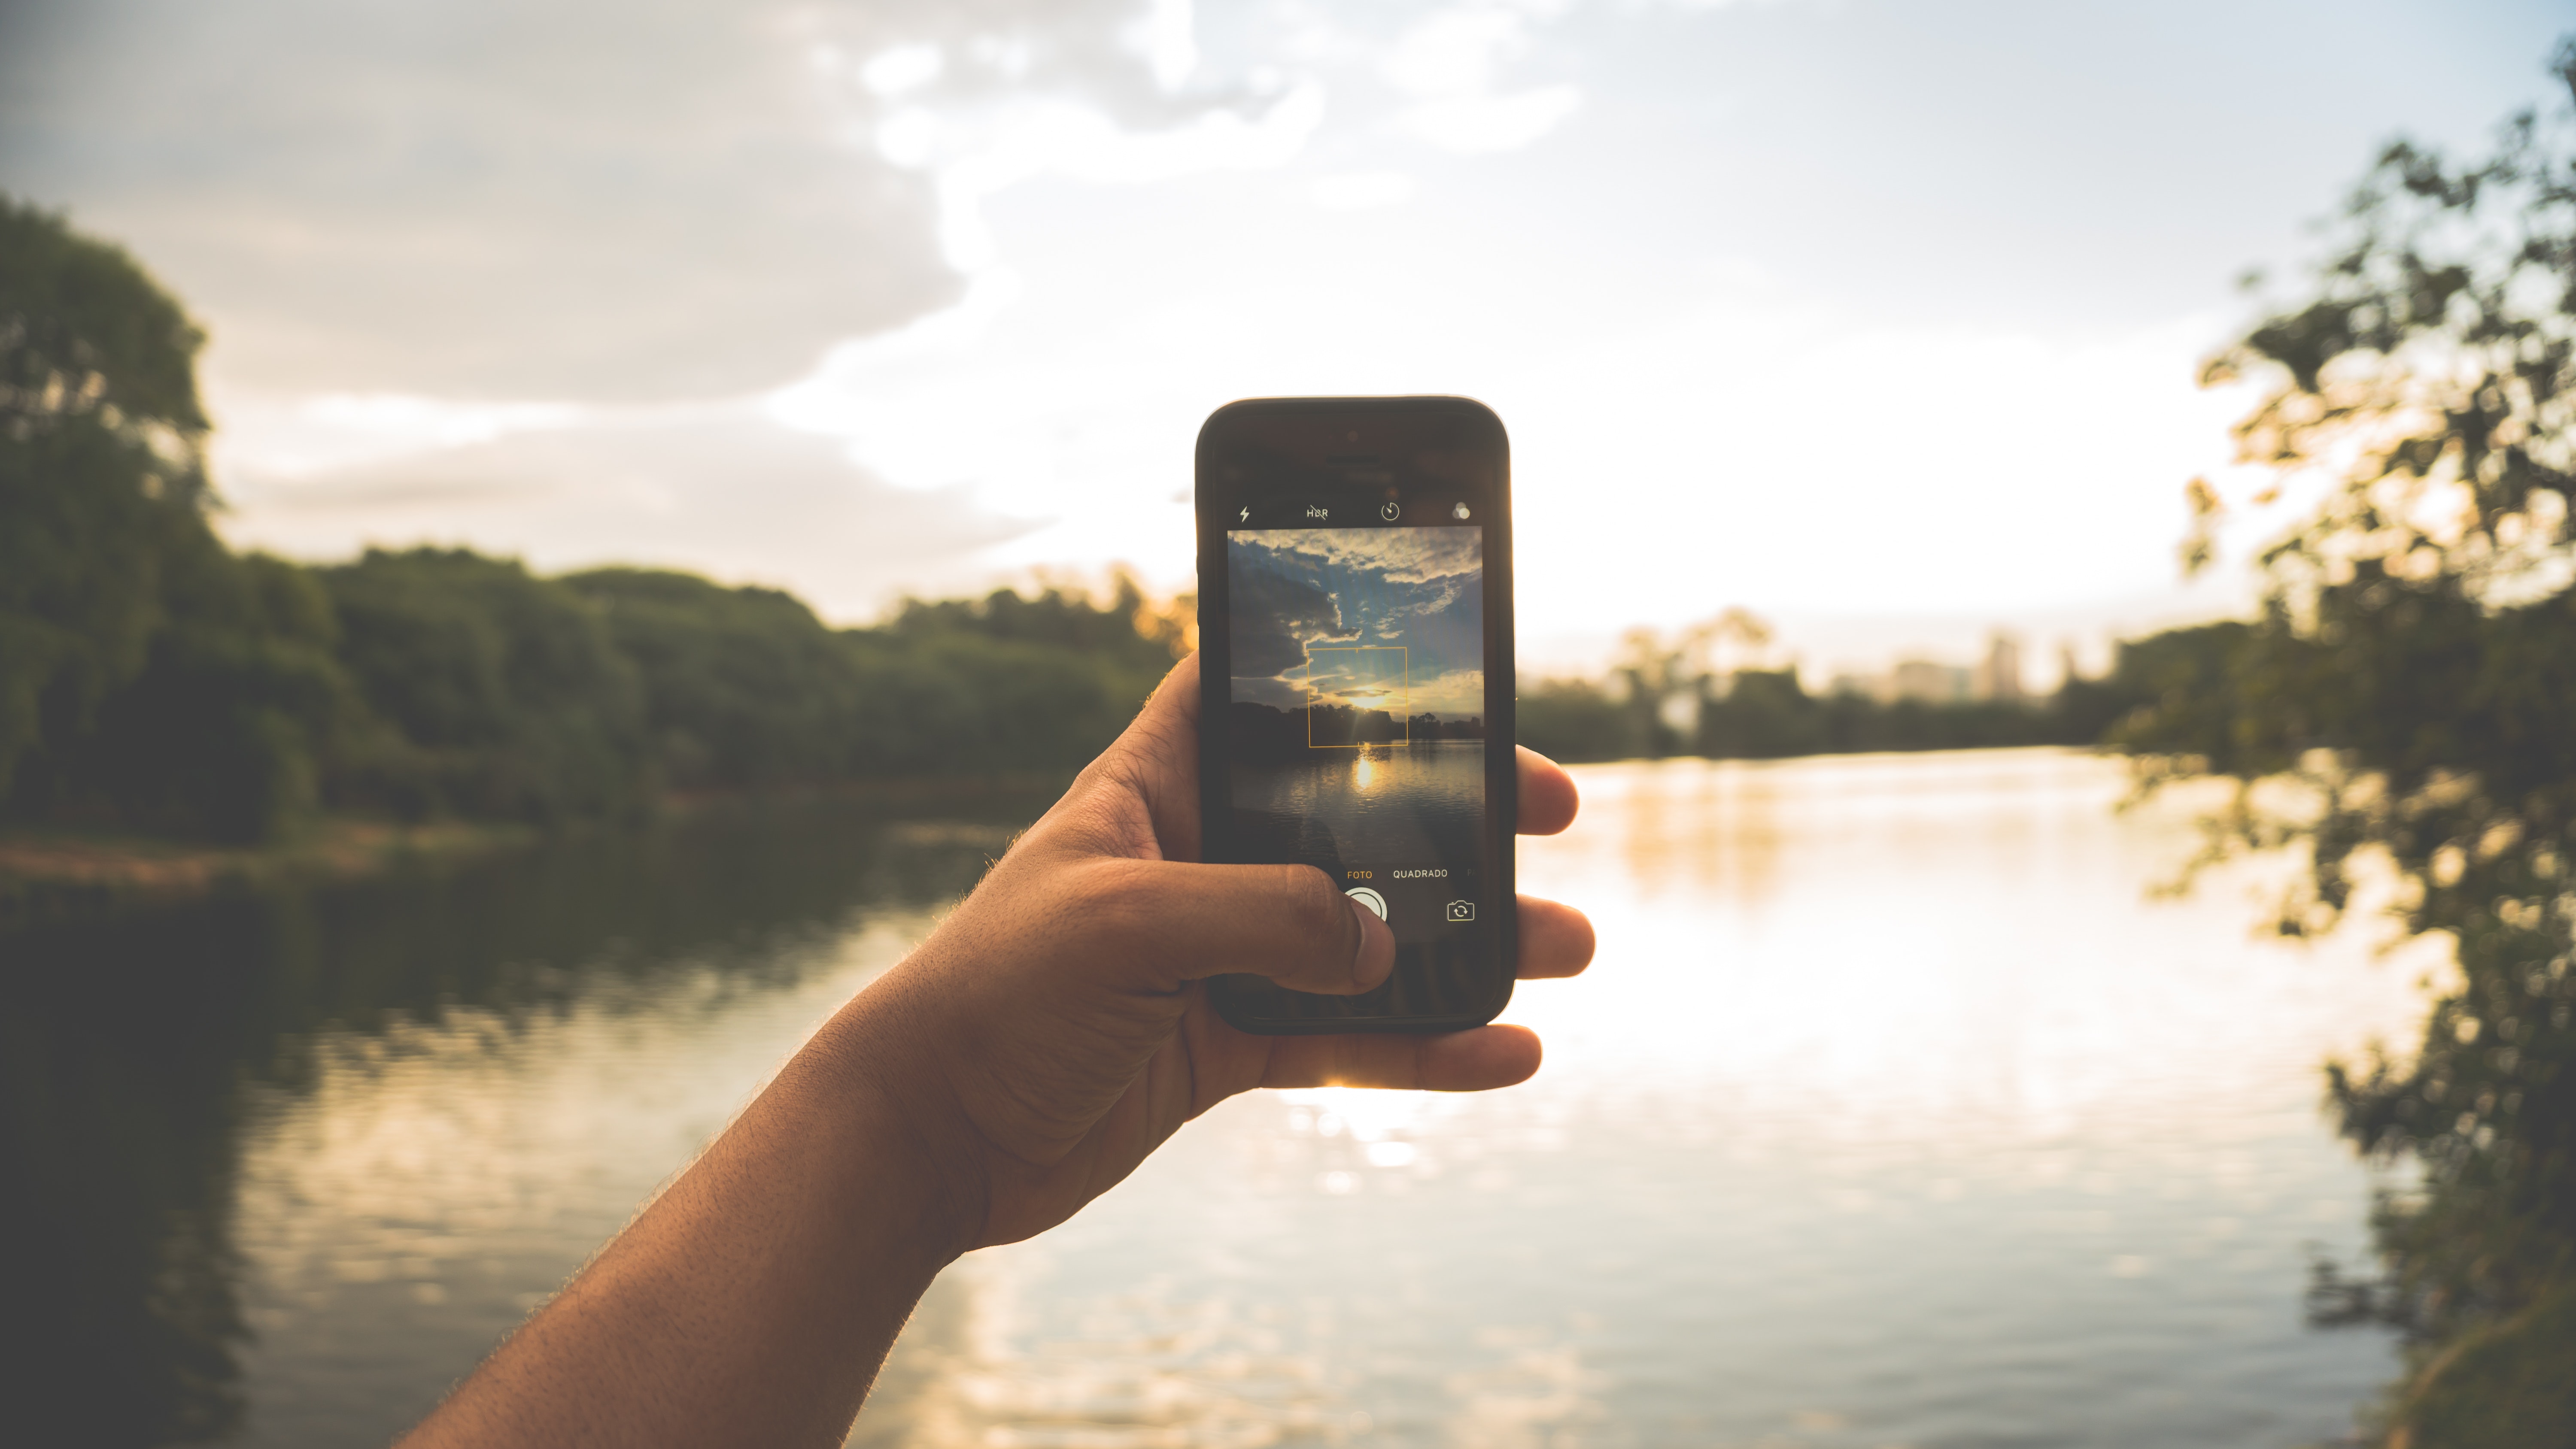 Close-up of Hand Holding Mobile Phone Against Lake, Mobile phone, Trees, Travel, Technology, HQ Photo